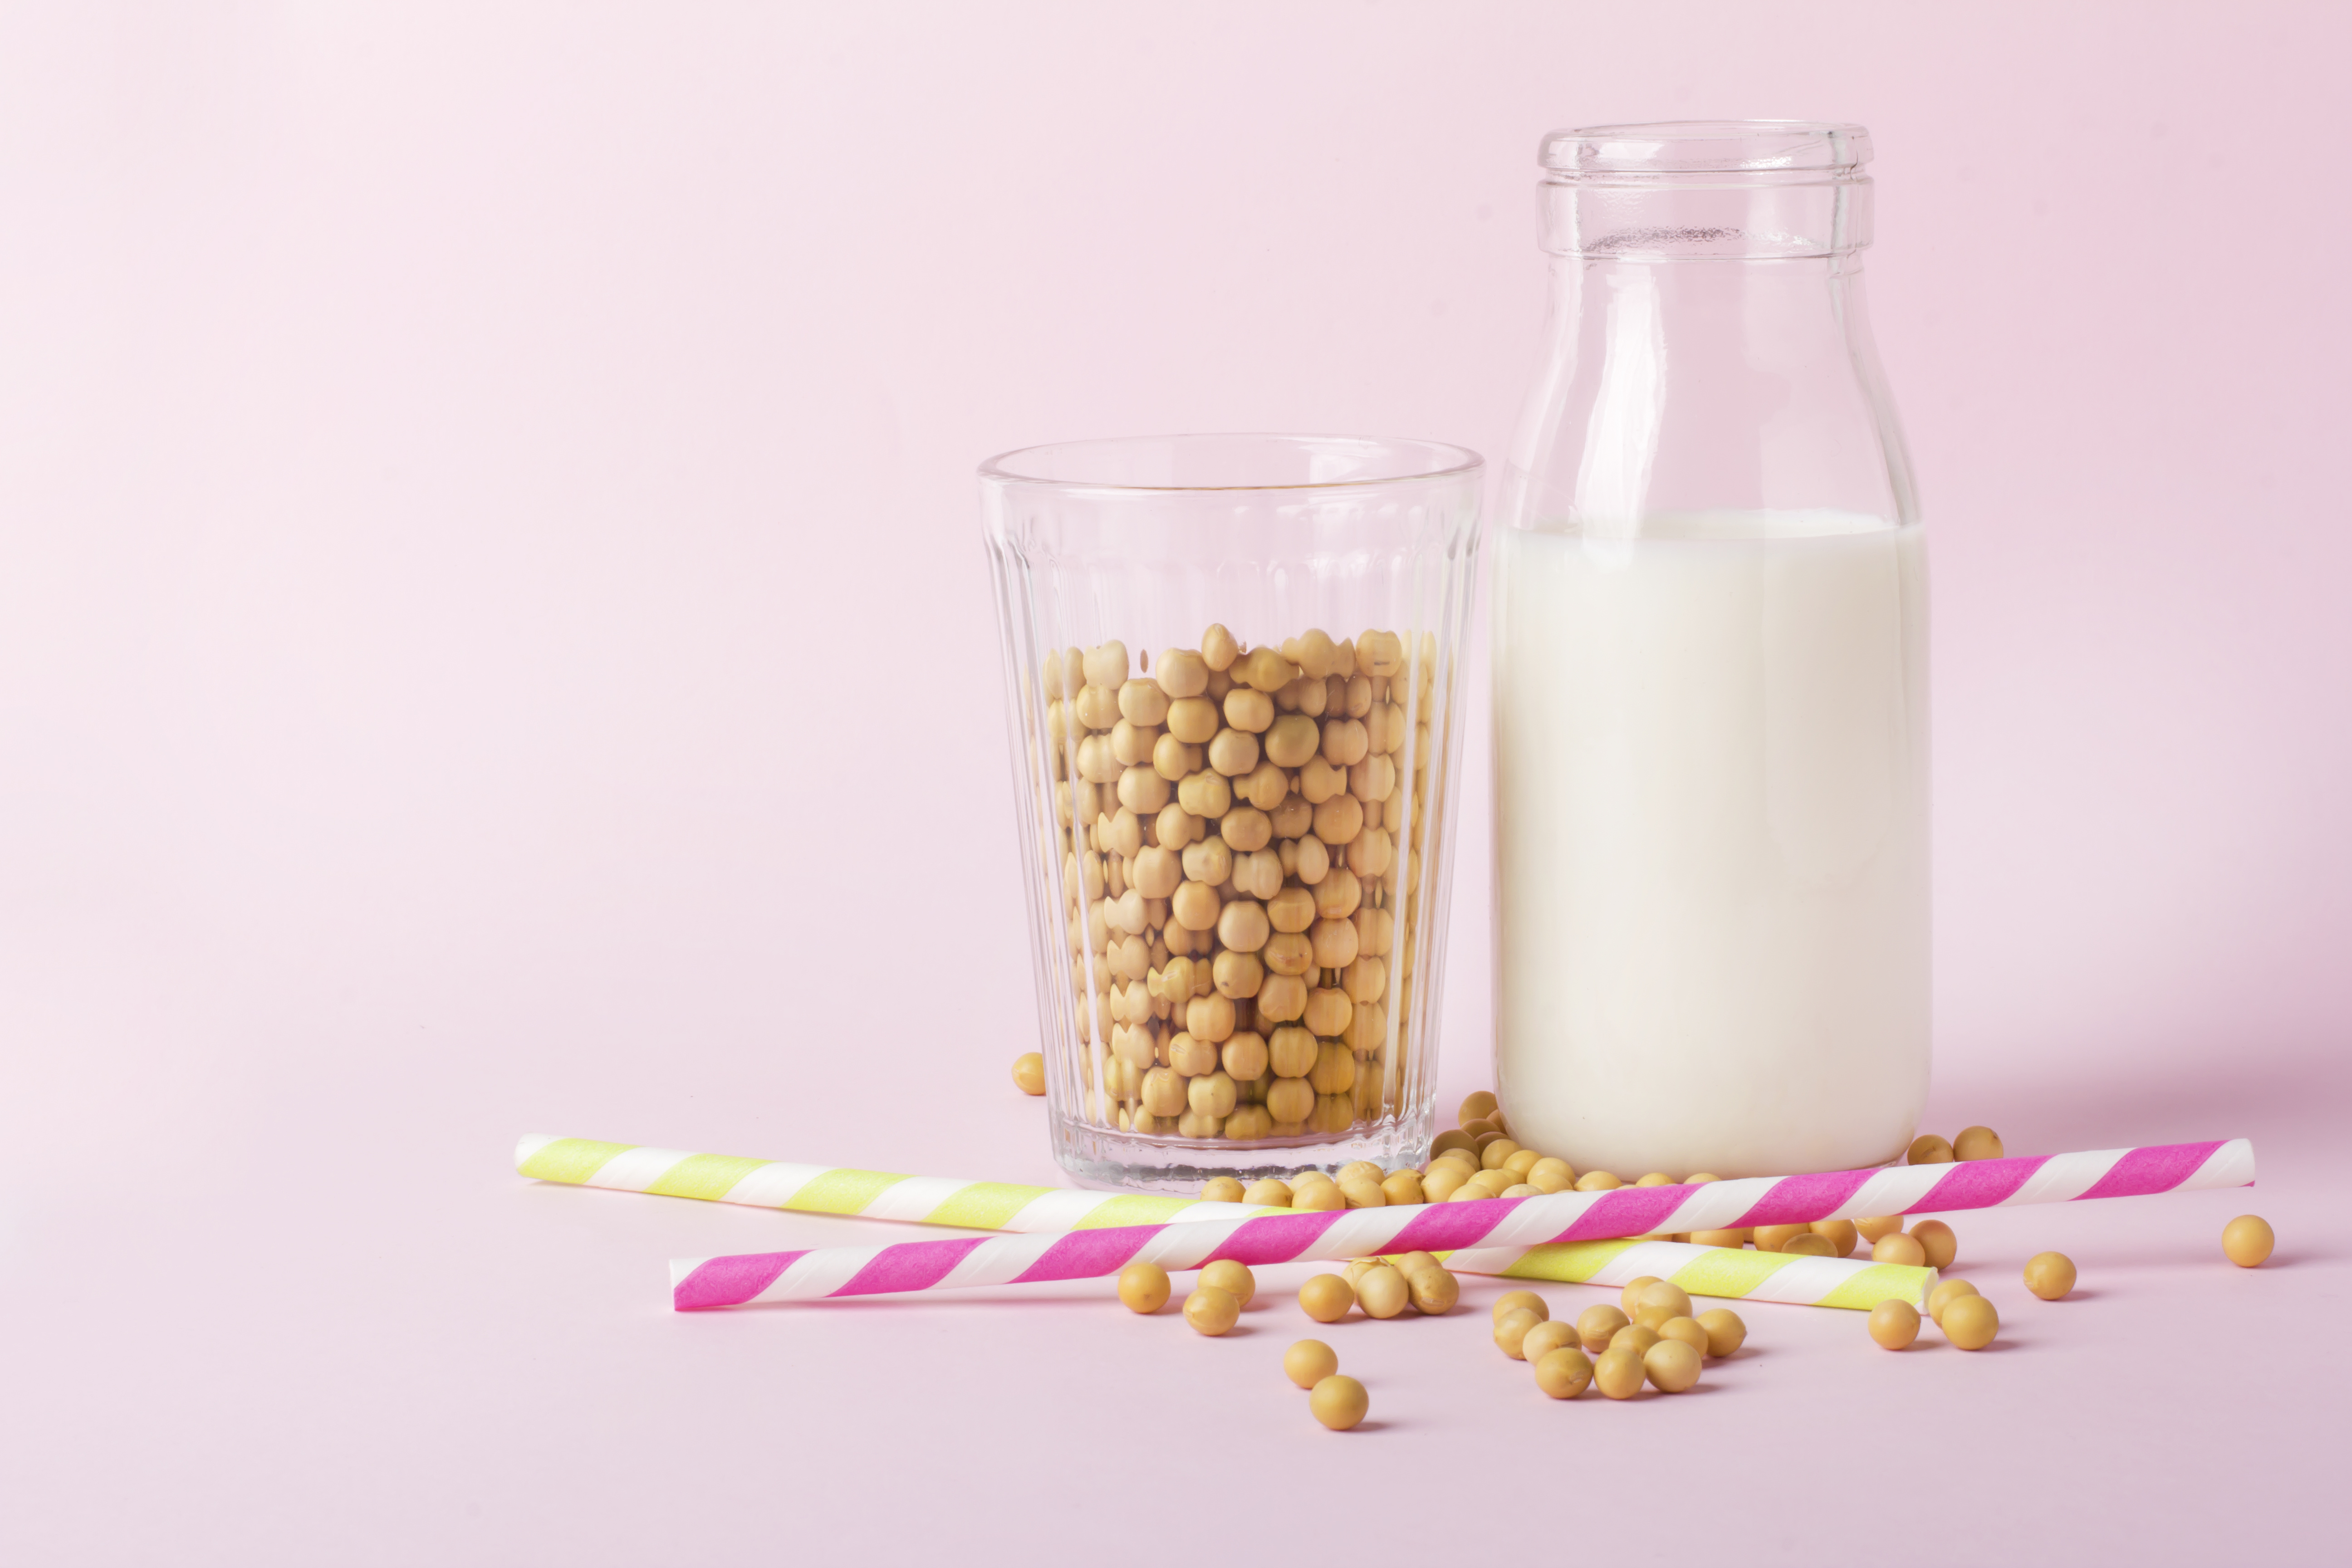 Can Soy Improve Bone and Heart Health Post Menopause?